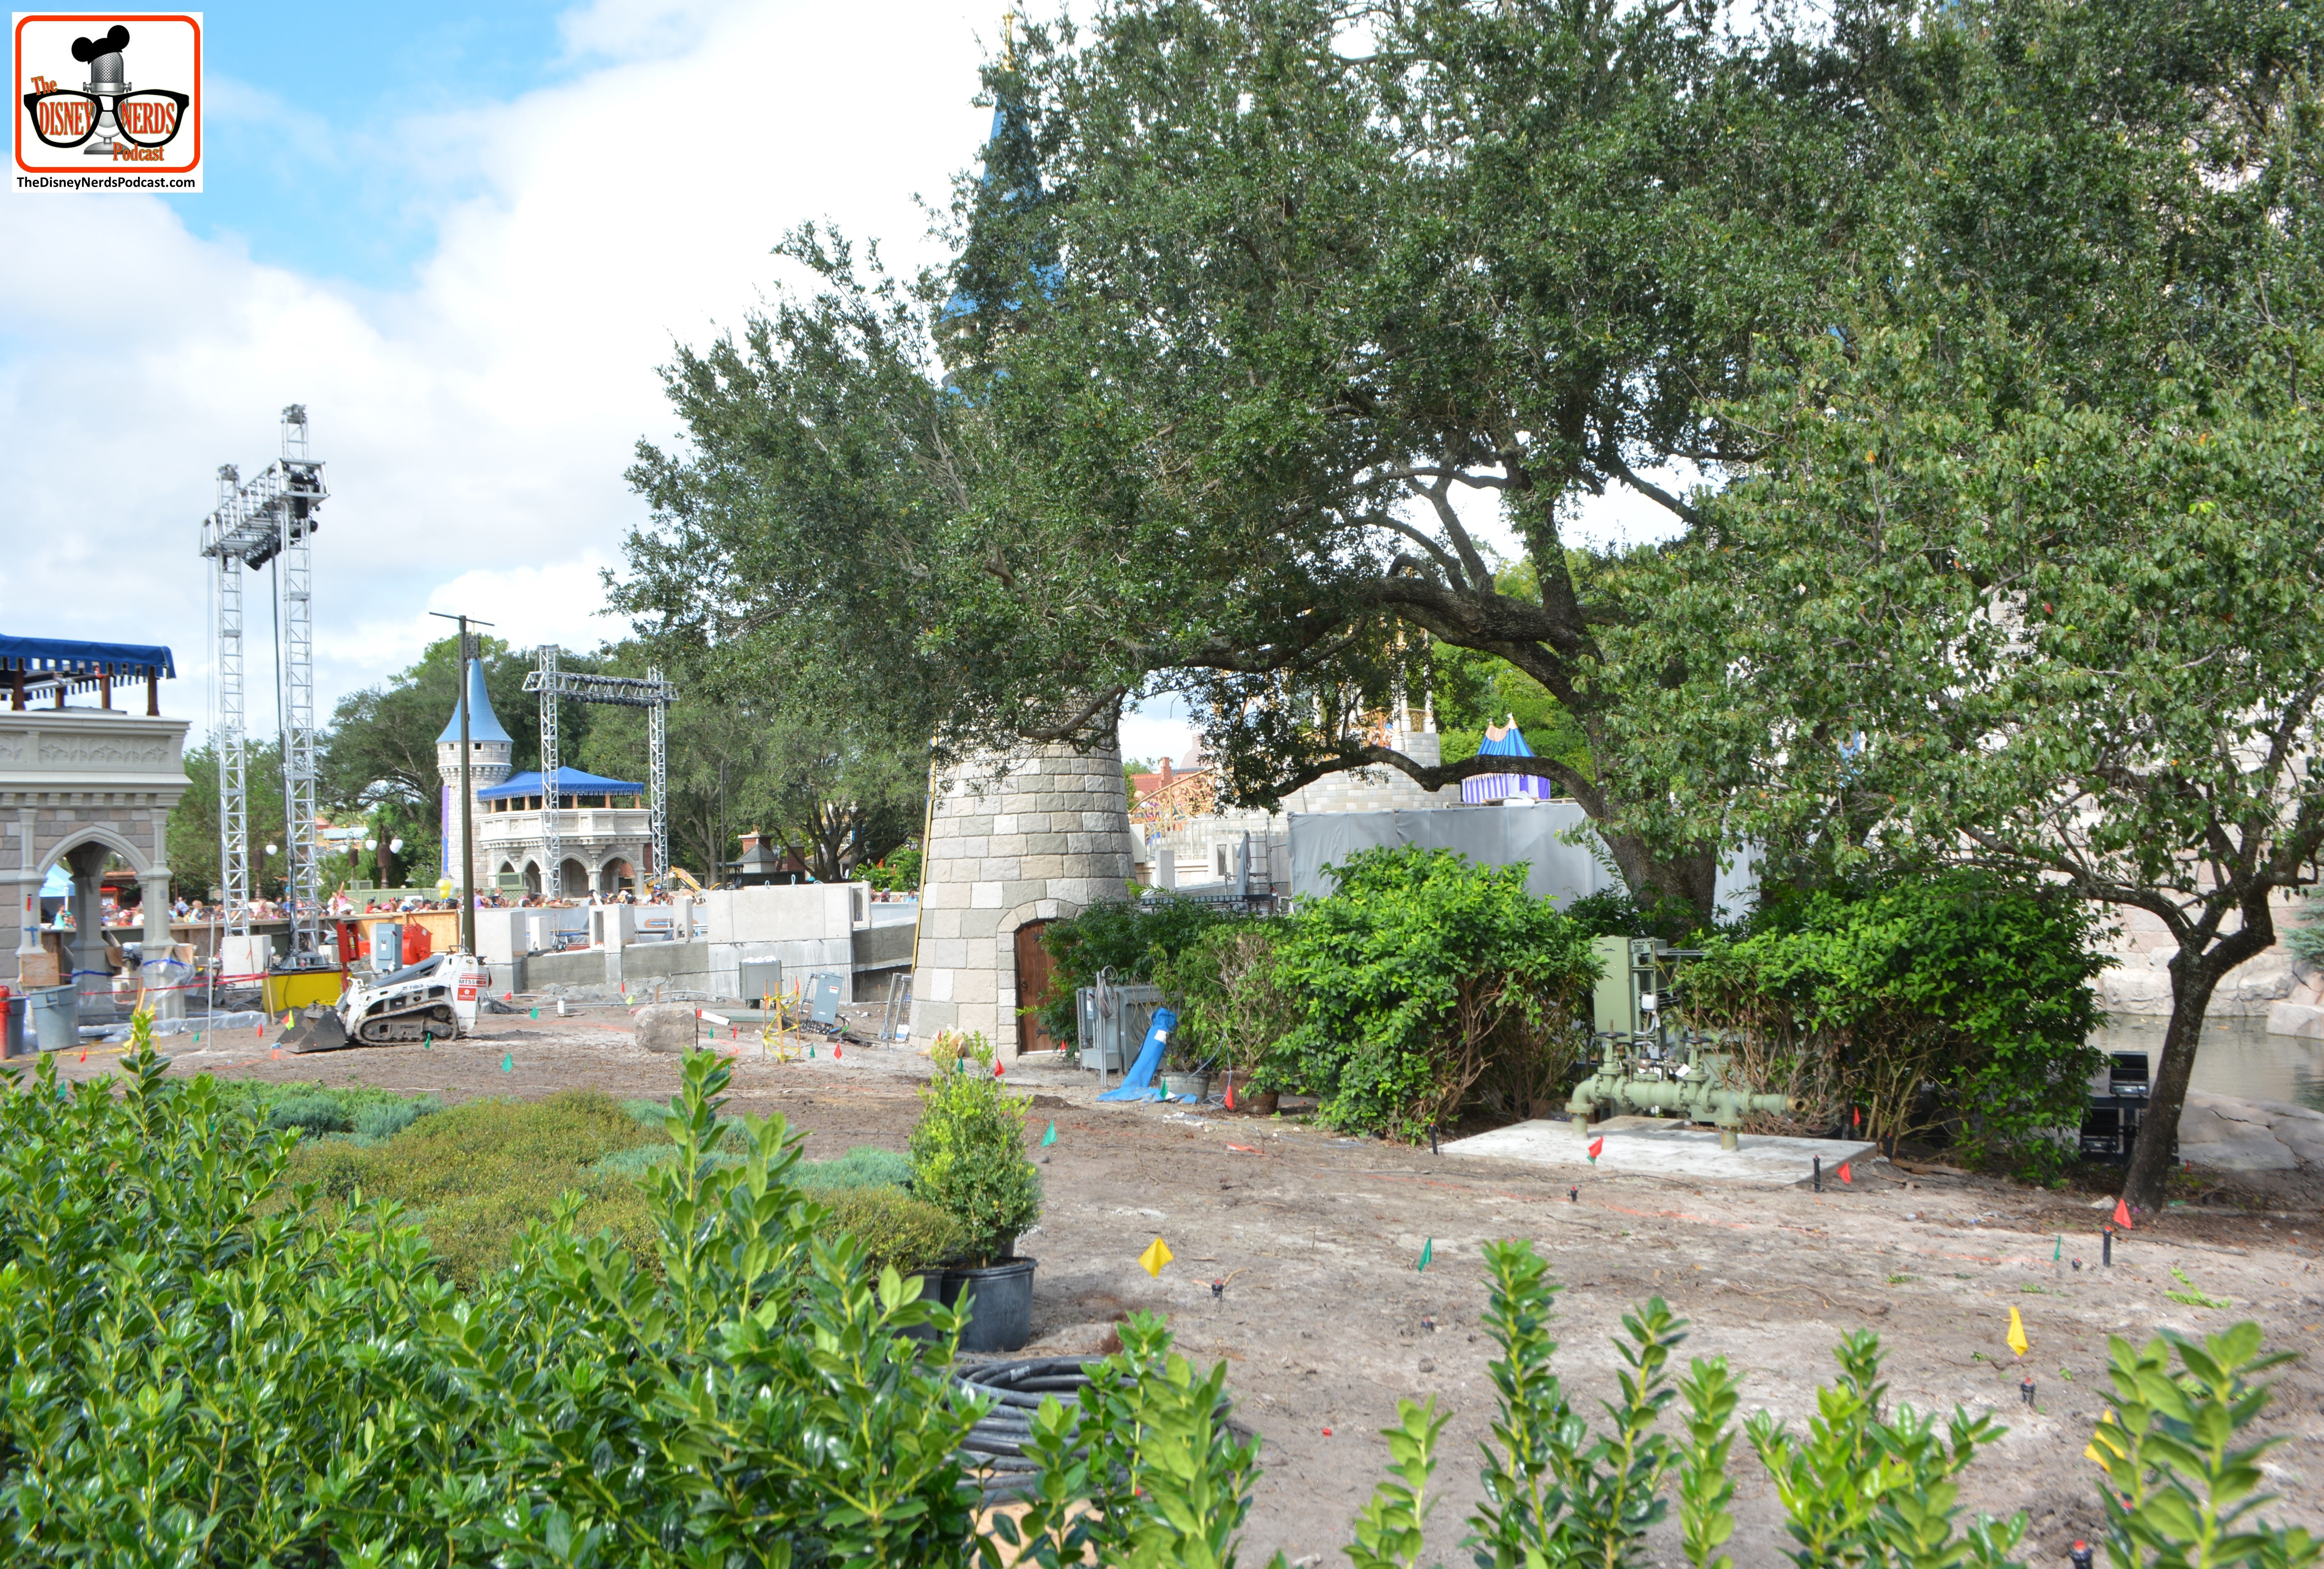 Hub Construction Continues - this is a few from the path to tomorrowland